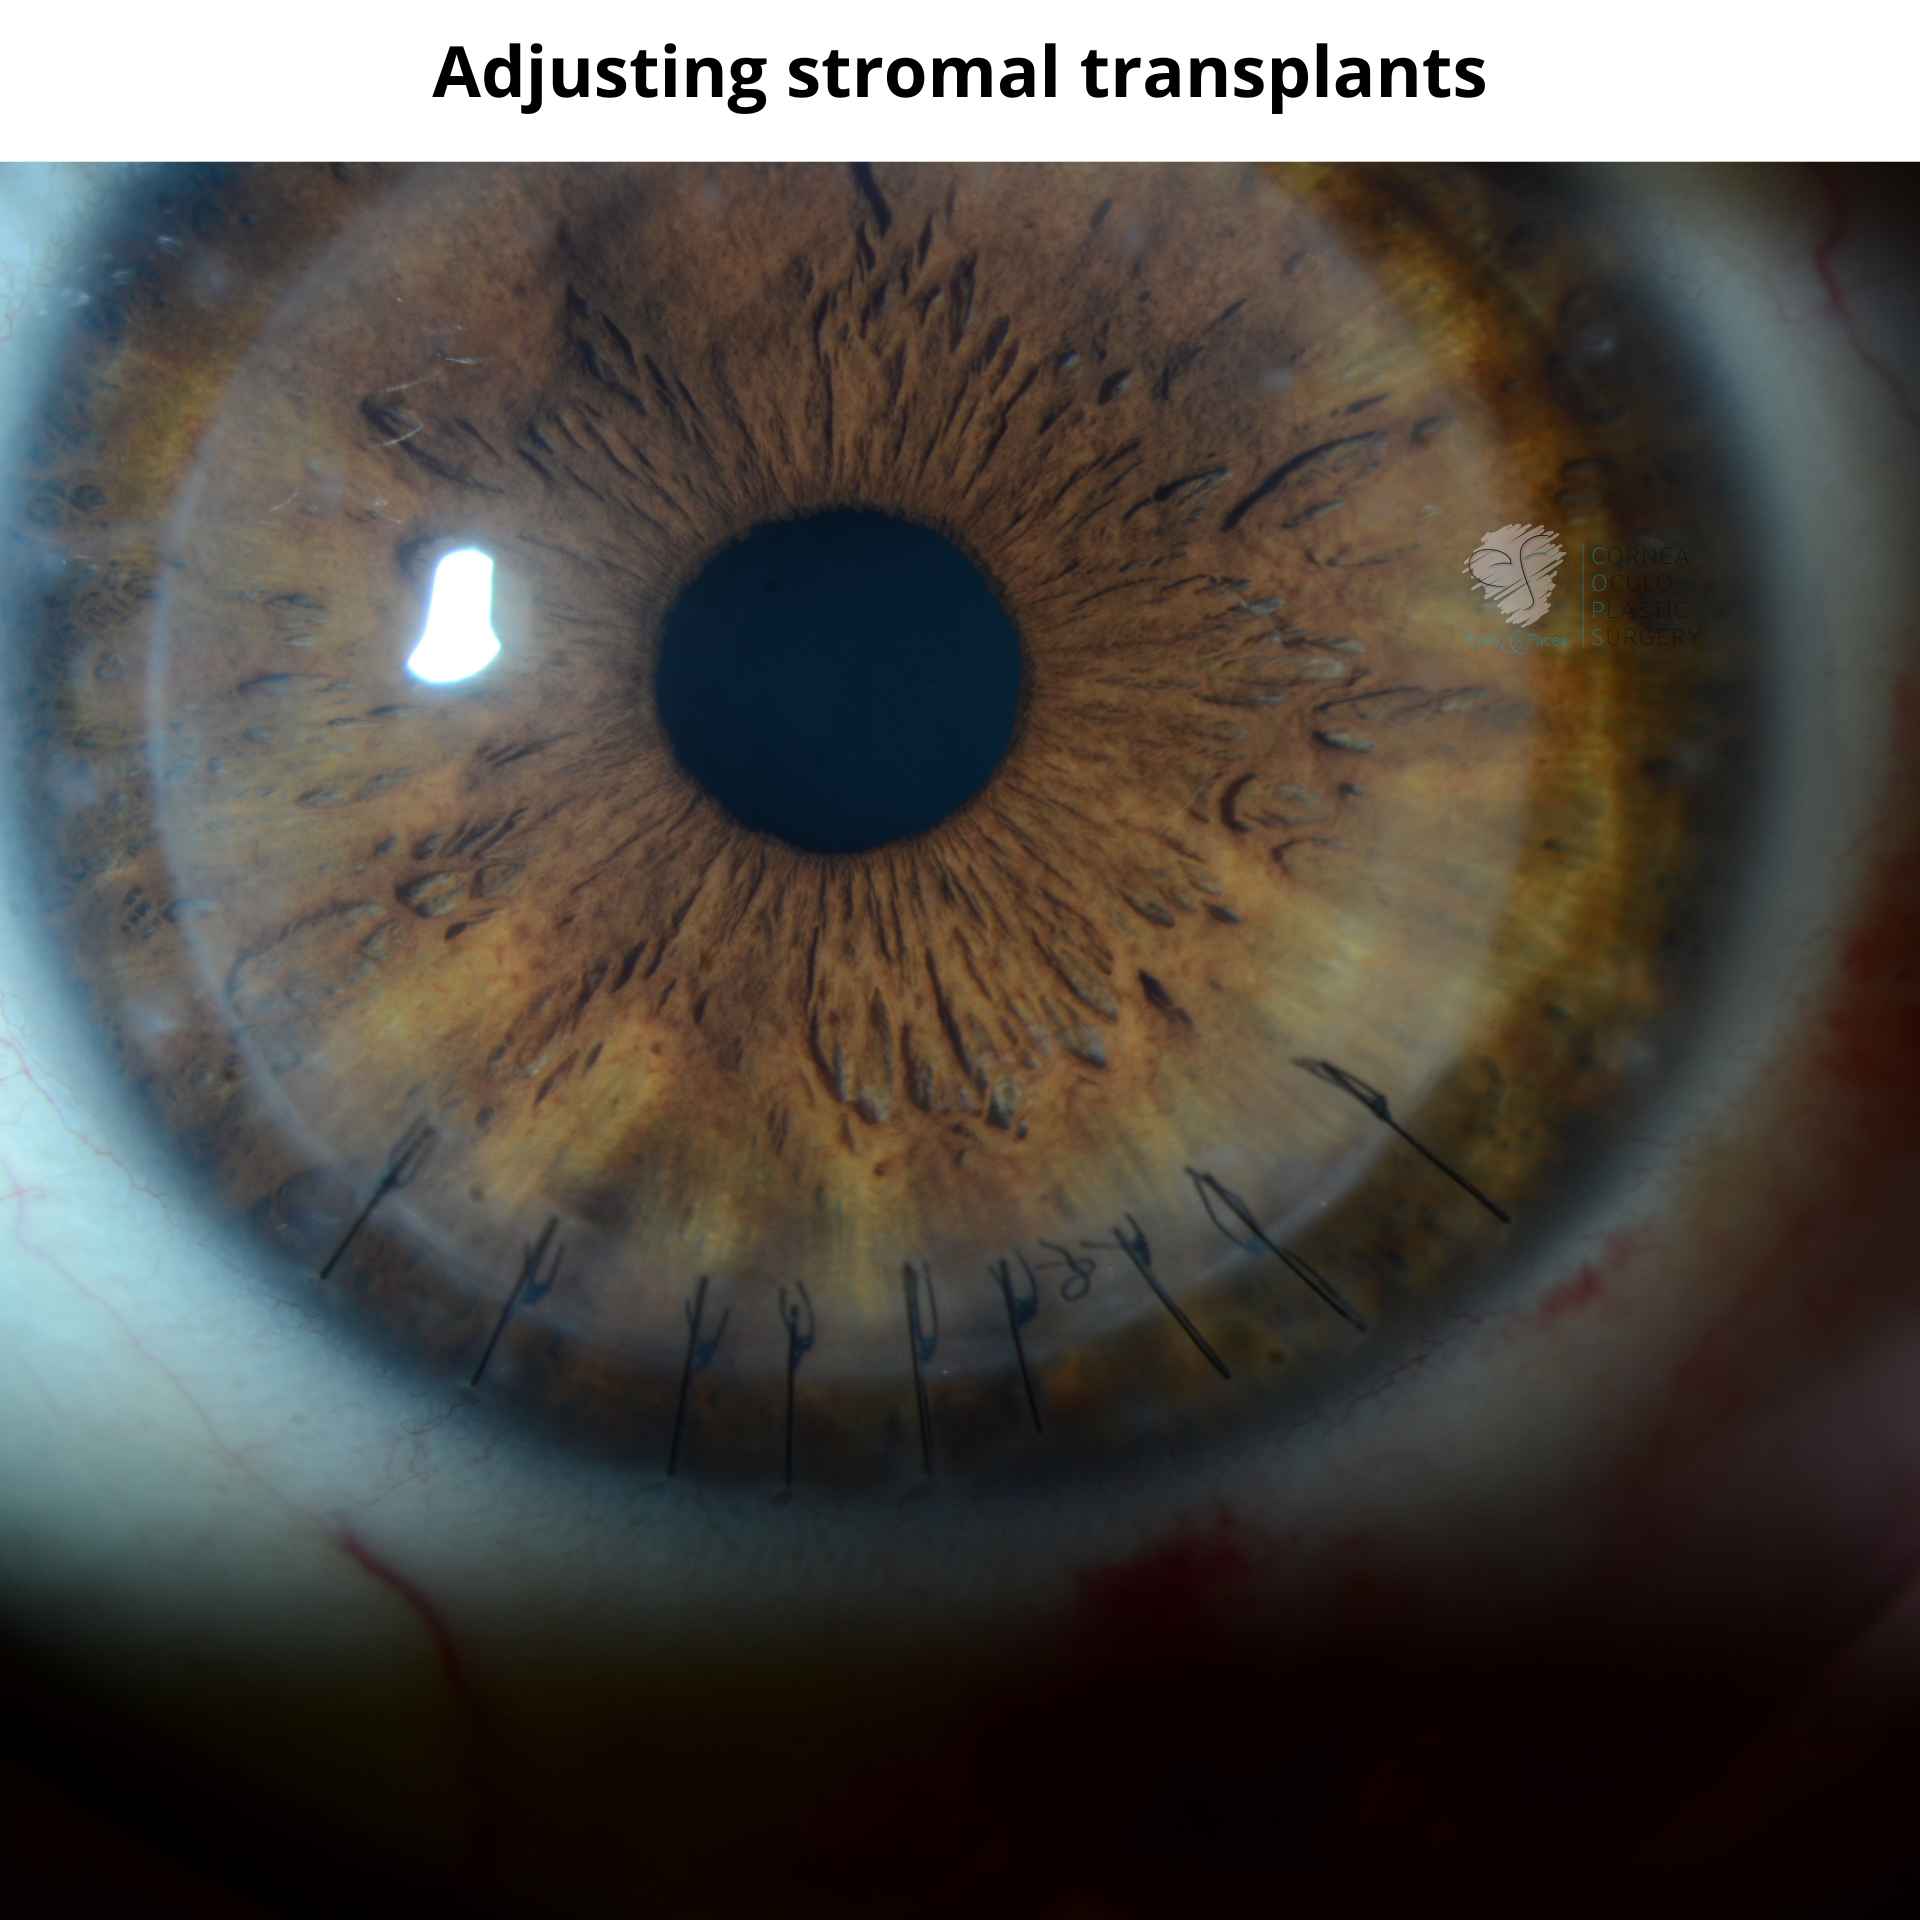 Adjusting Stromal Transplants - one zone of the eye has been resutured to combat eye rubbing.